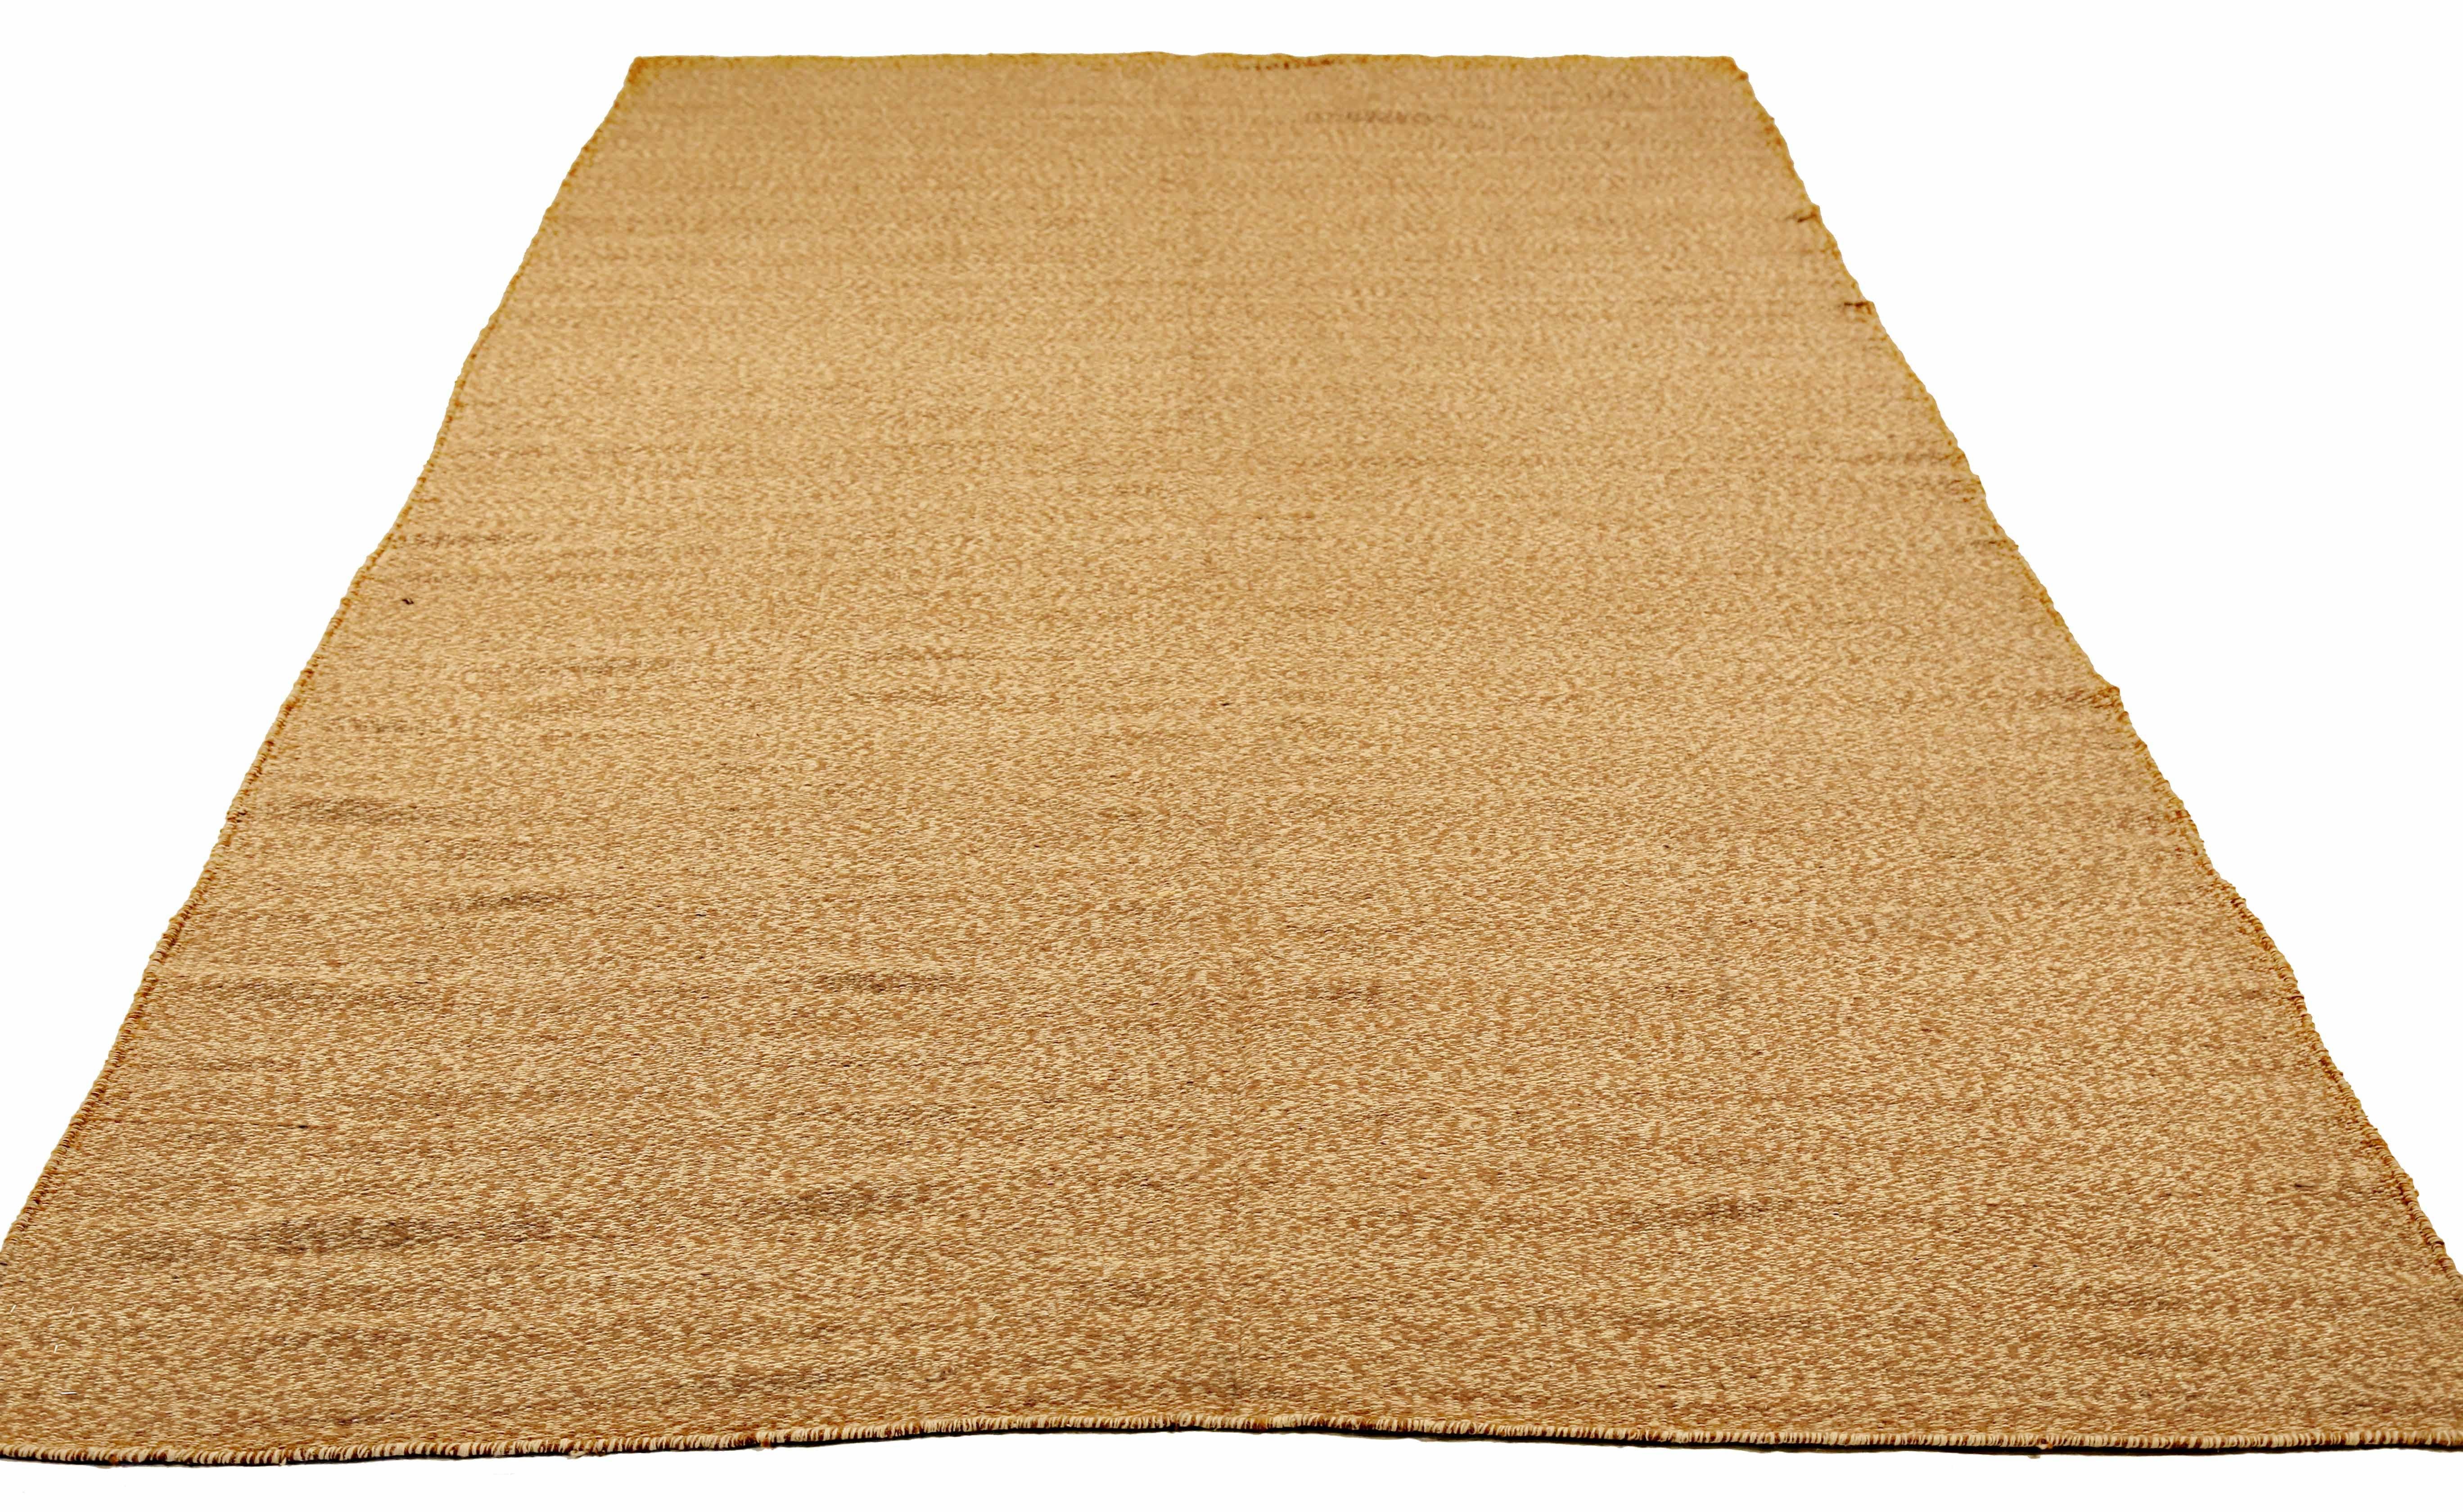 Modern Turkish rug handwoven from the finest sheep’s wool and colored with all-natural vegetable dyes that are safe for humans and pets. It’s a traditional Kilim flat-weave design featuring elegant color patterns of brown and ivory. It’s a stunning